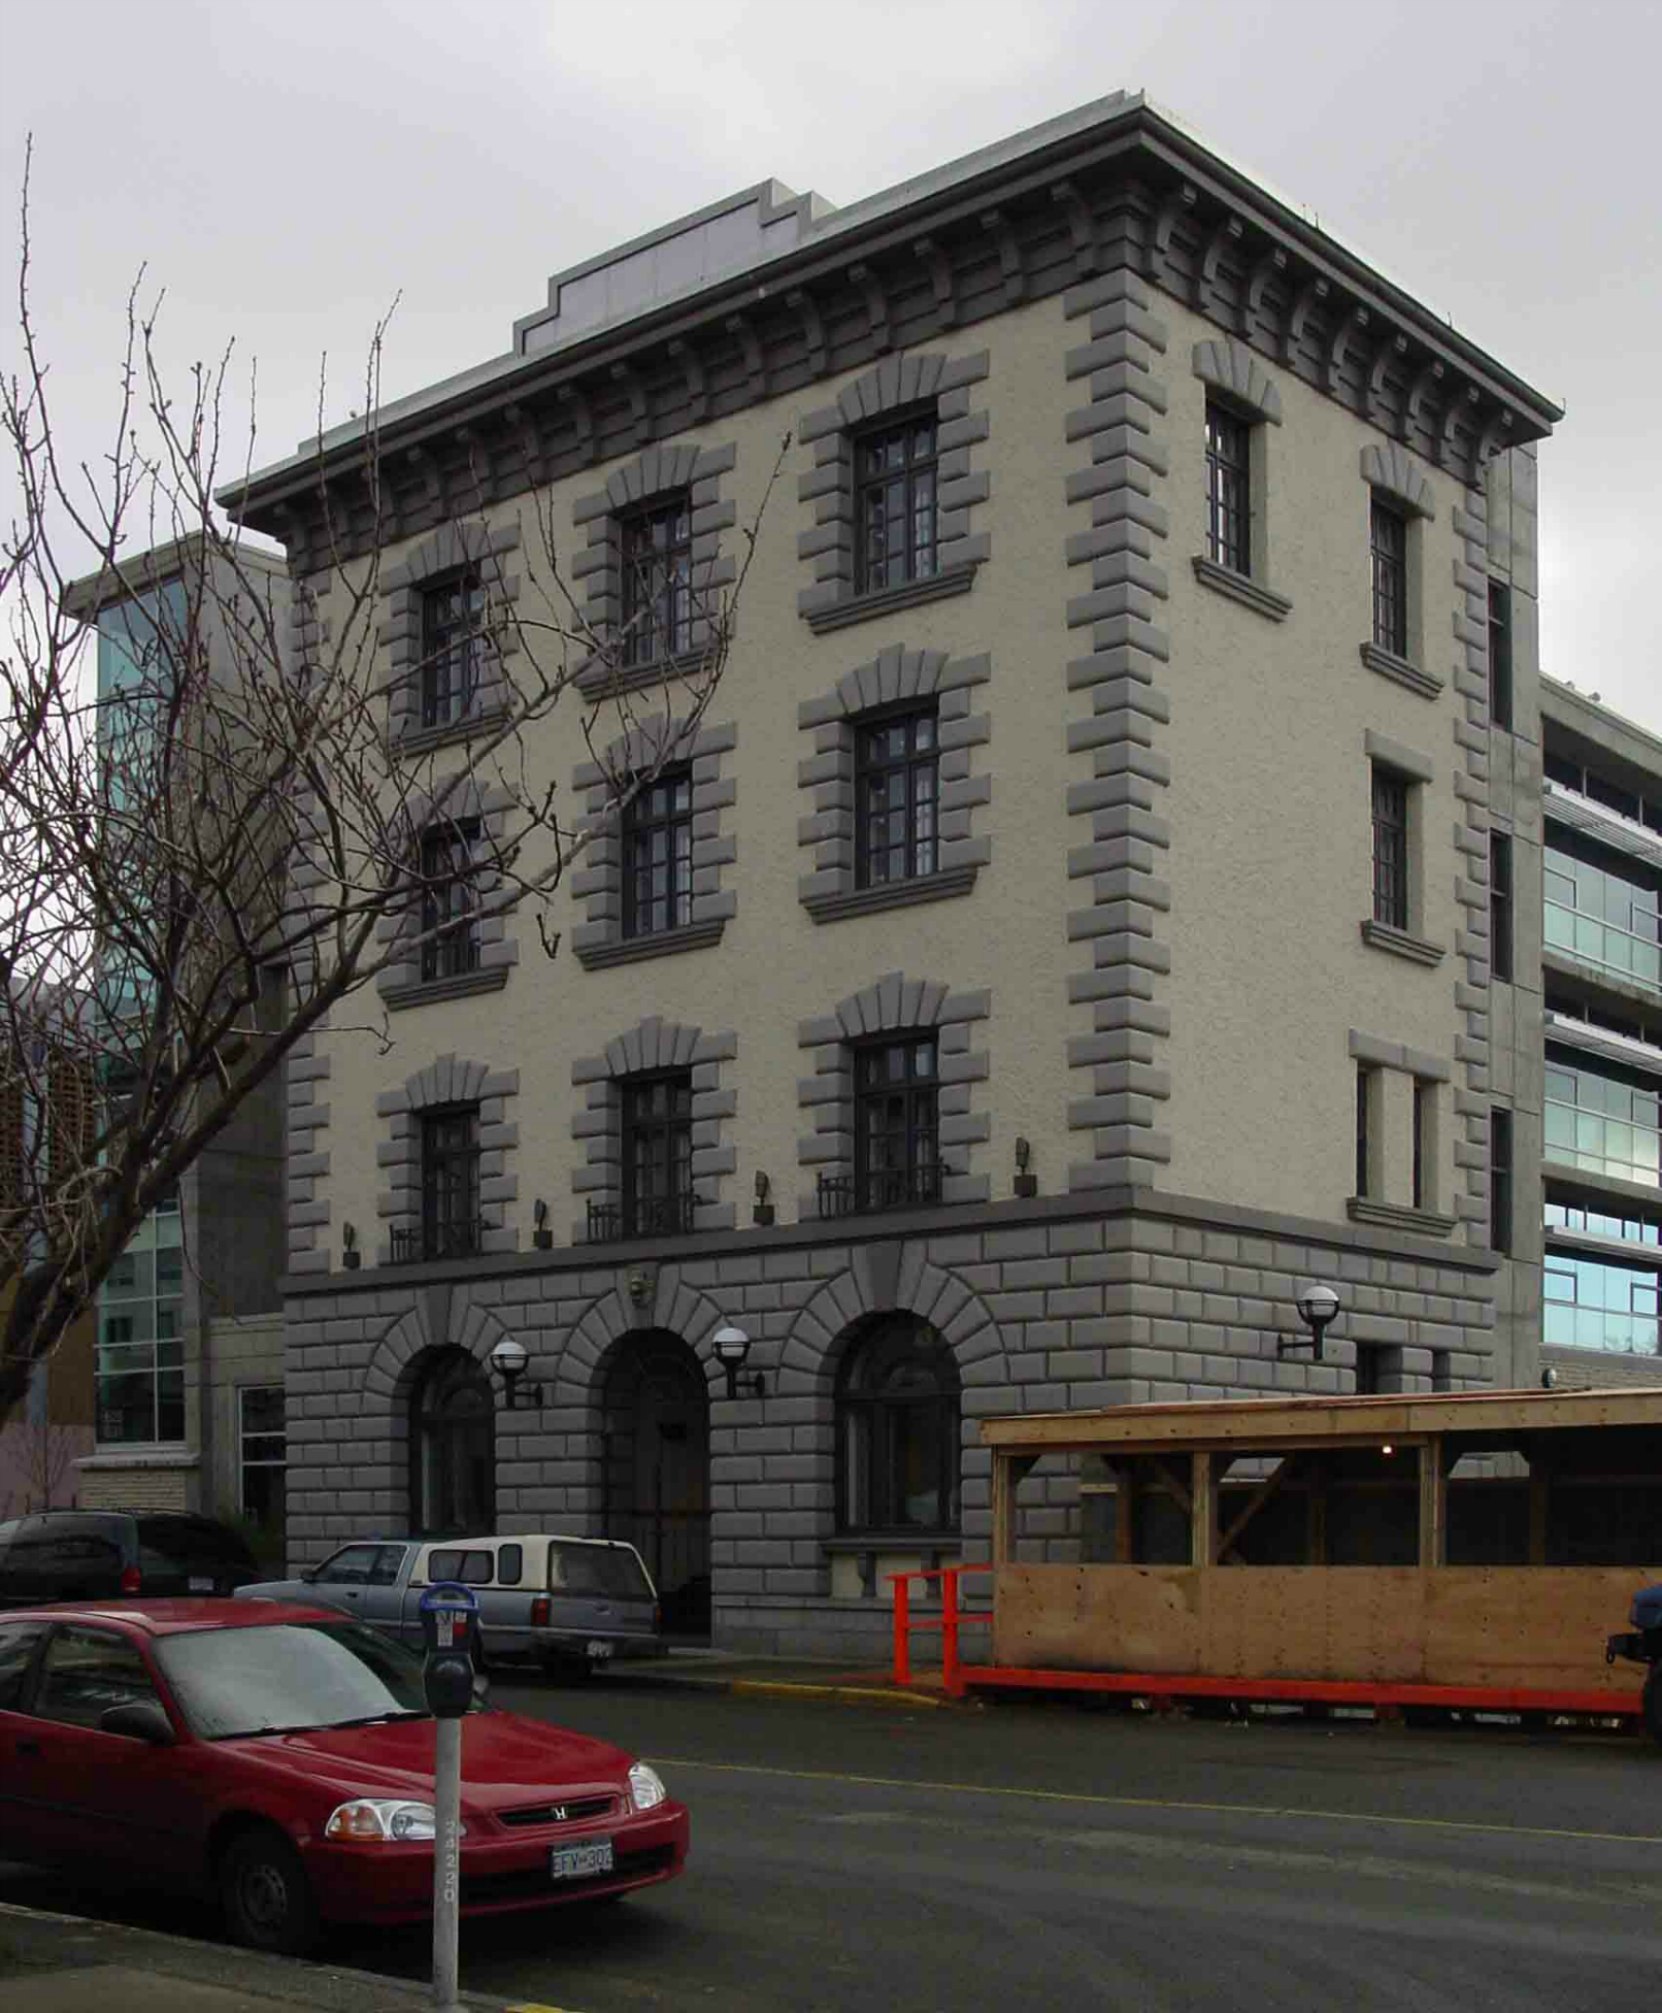 The former Victoria Police headquarters building, 625 Fisgard Street, in 2004 before its facade was incorporated into the C.R.D. building in Centennial Square.